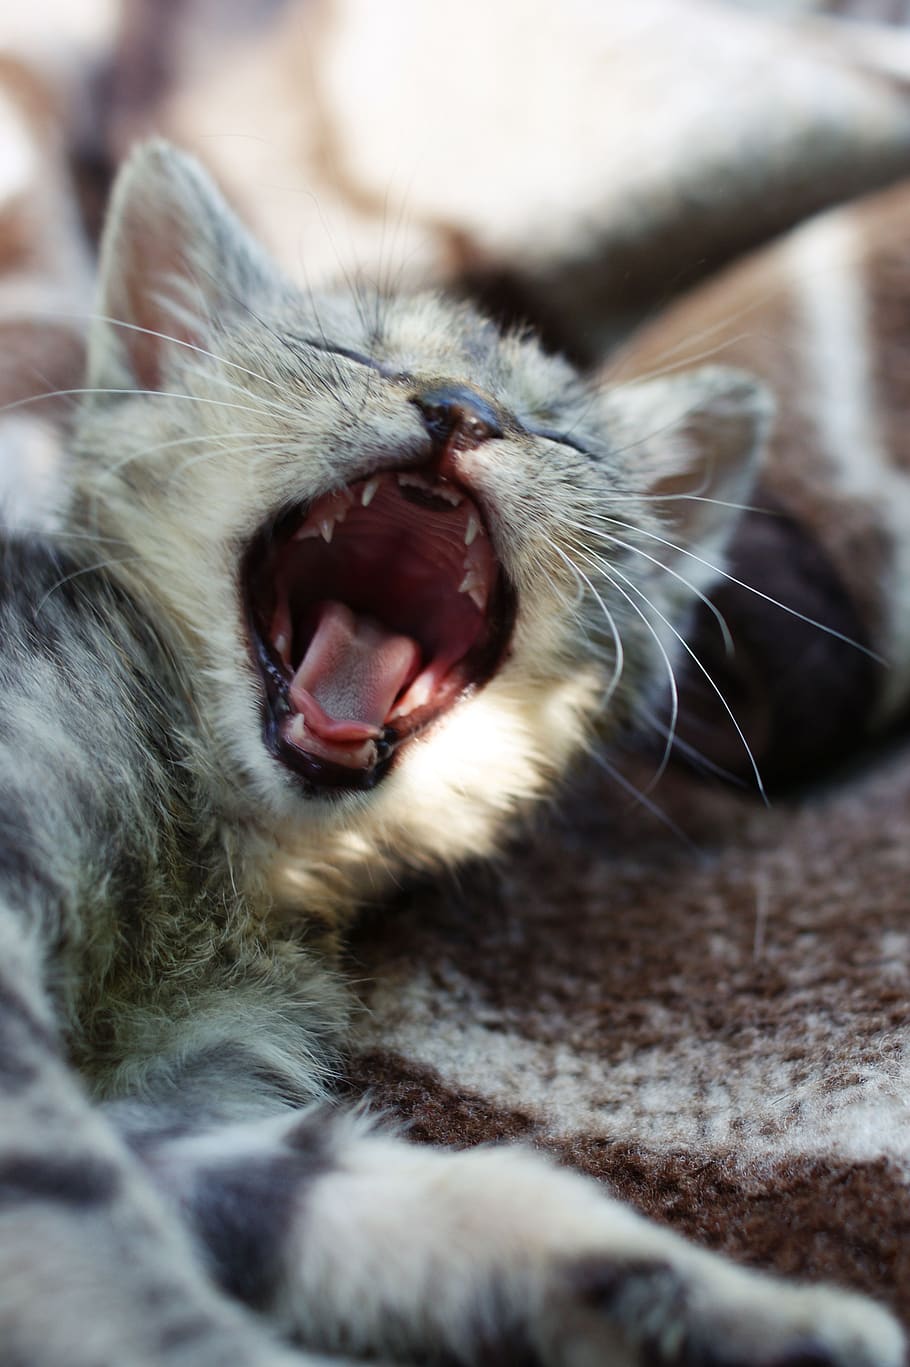 yawn, dart, kitten, a member of the family, at the court of, gray, fur, pet, mammal, animal themes